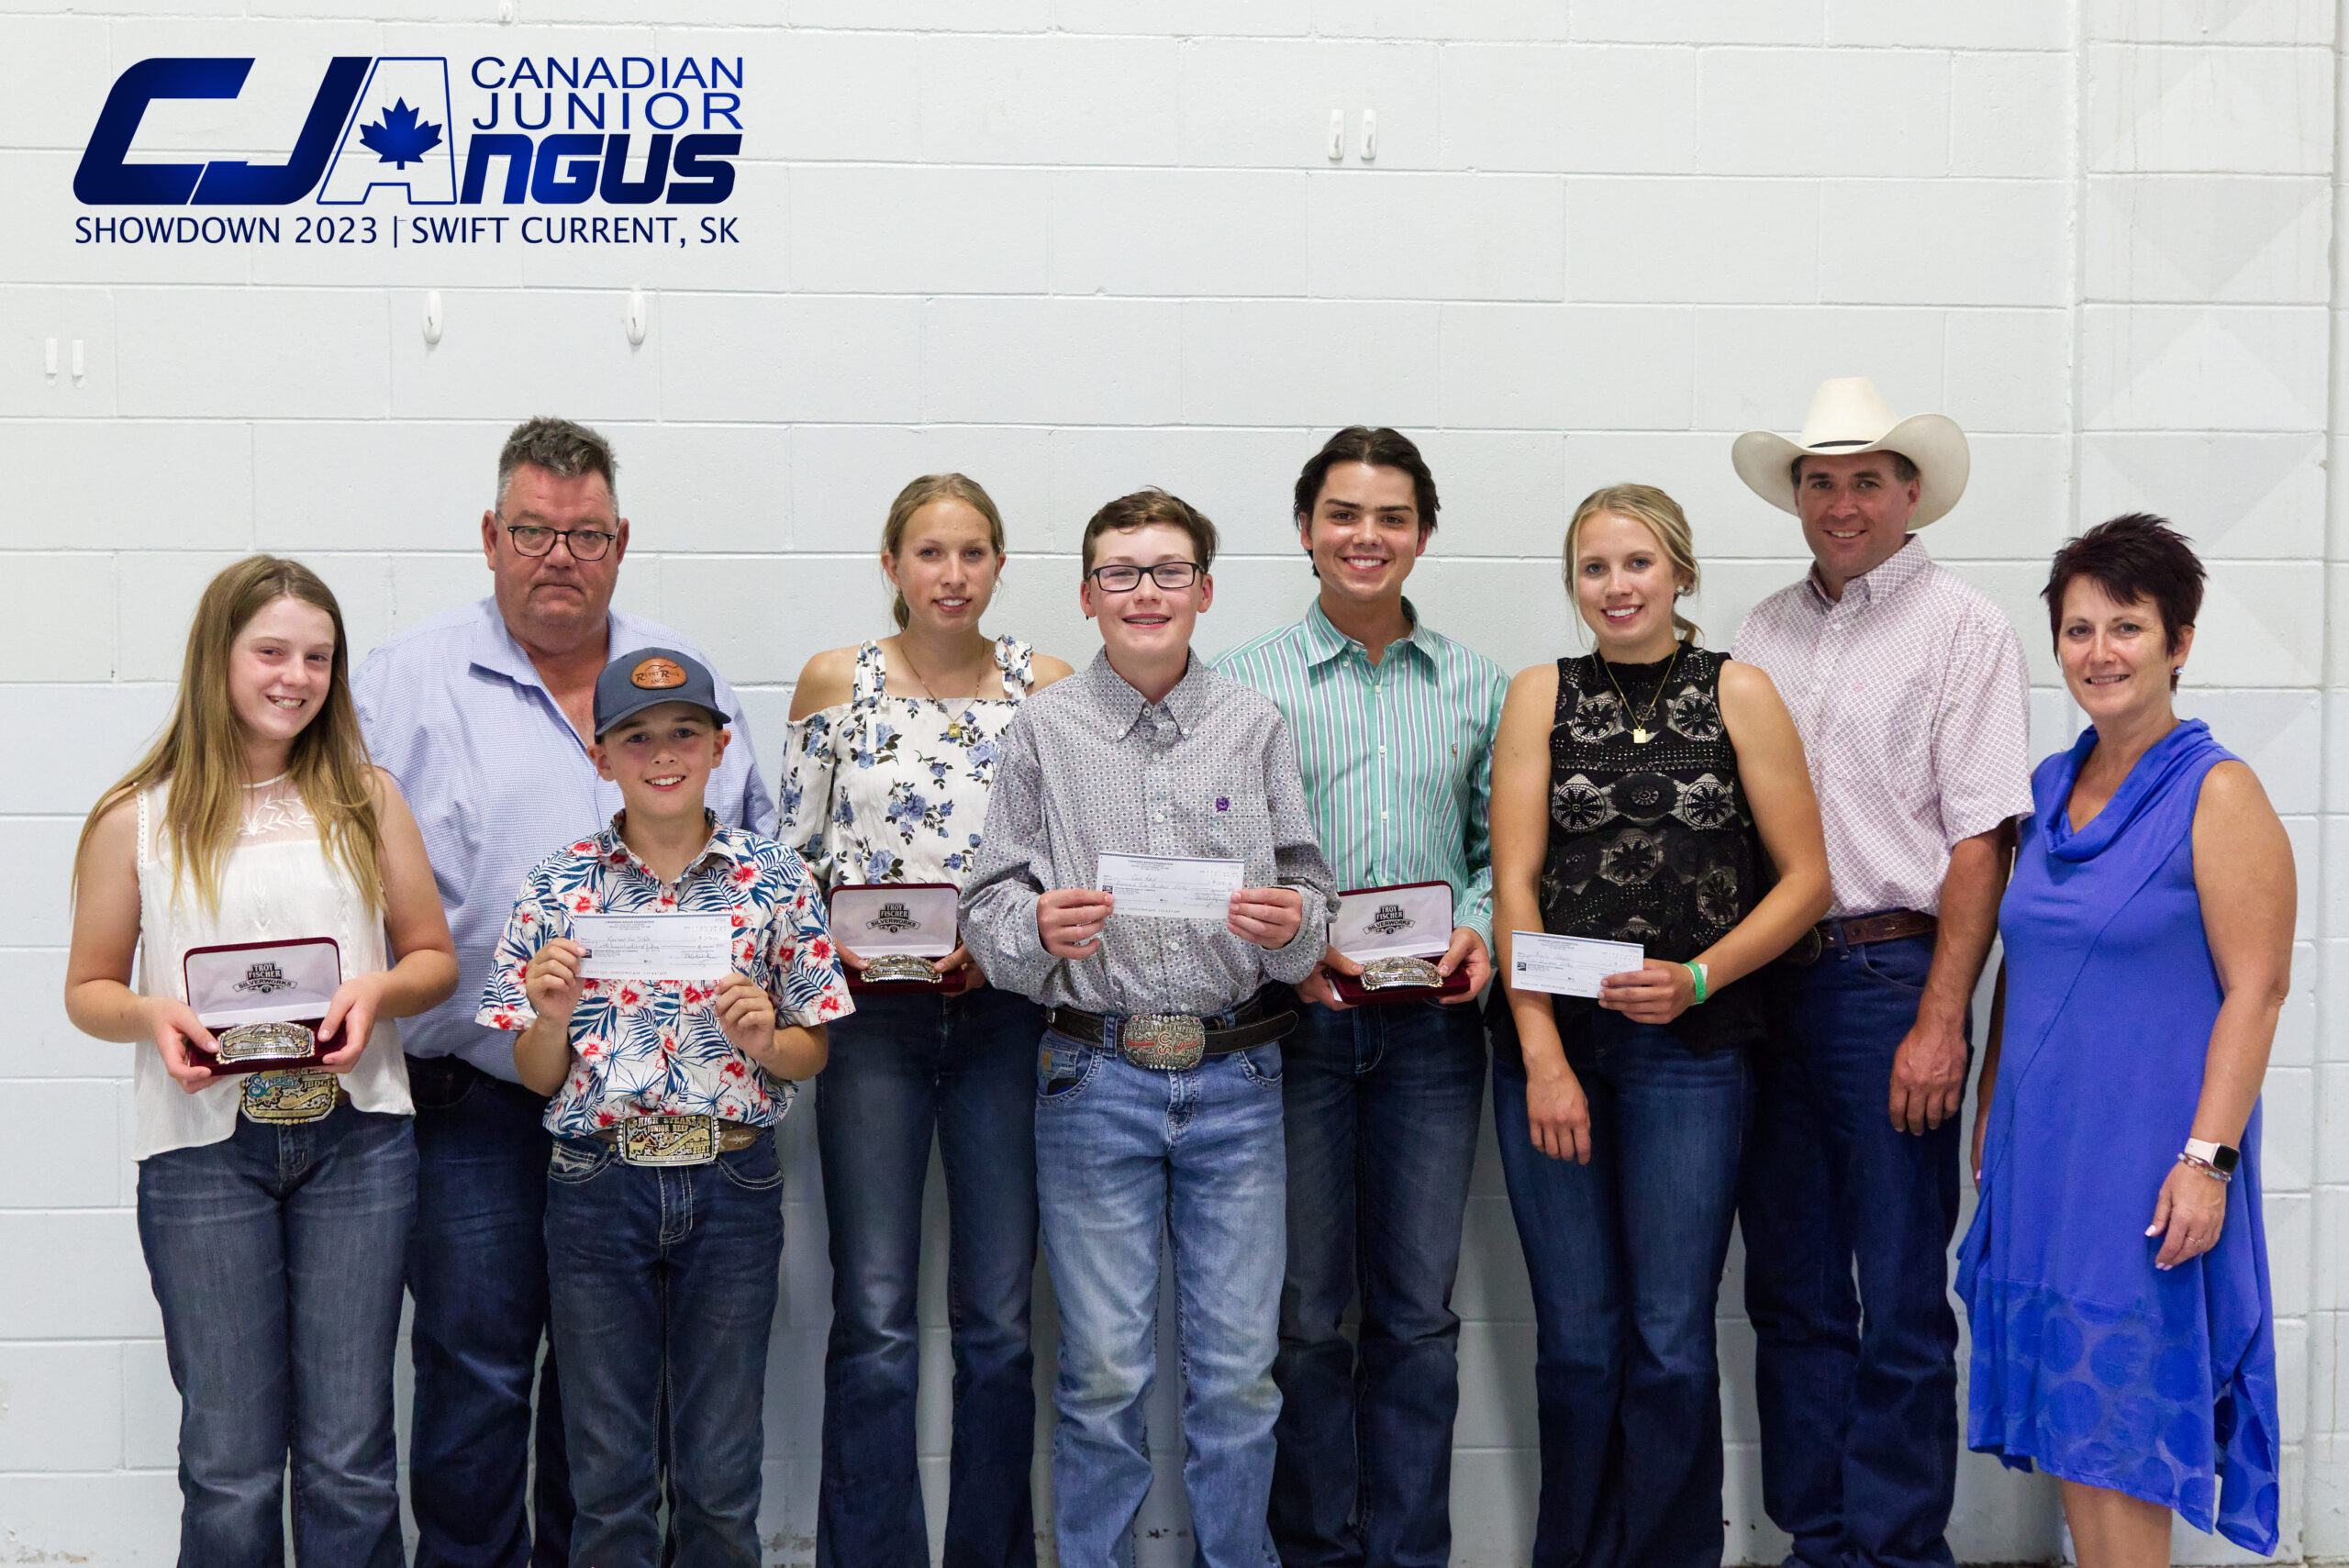 From Left to Right: Junior Grand Aggregate: Joss Pittman Reserve Junior Grand Aggregate: Karsen Van Sickle Intermediate Grand Aggregate: Kasey Adams Reserve Intermediate Grand Aggregate: Gus Reid Senior Grand Aggregate: Baxter Blair Reserve Senior Grand Aggregate: Keely Adams